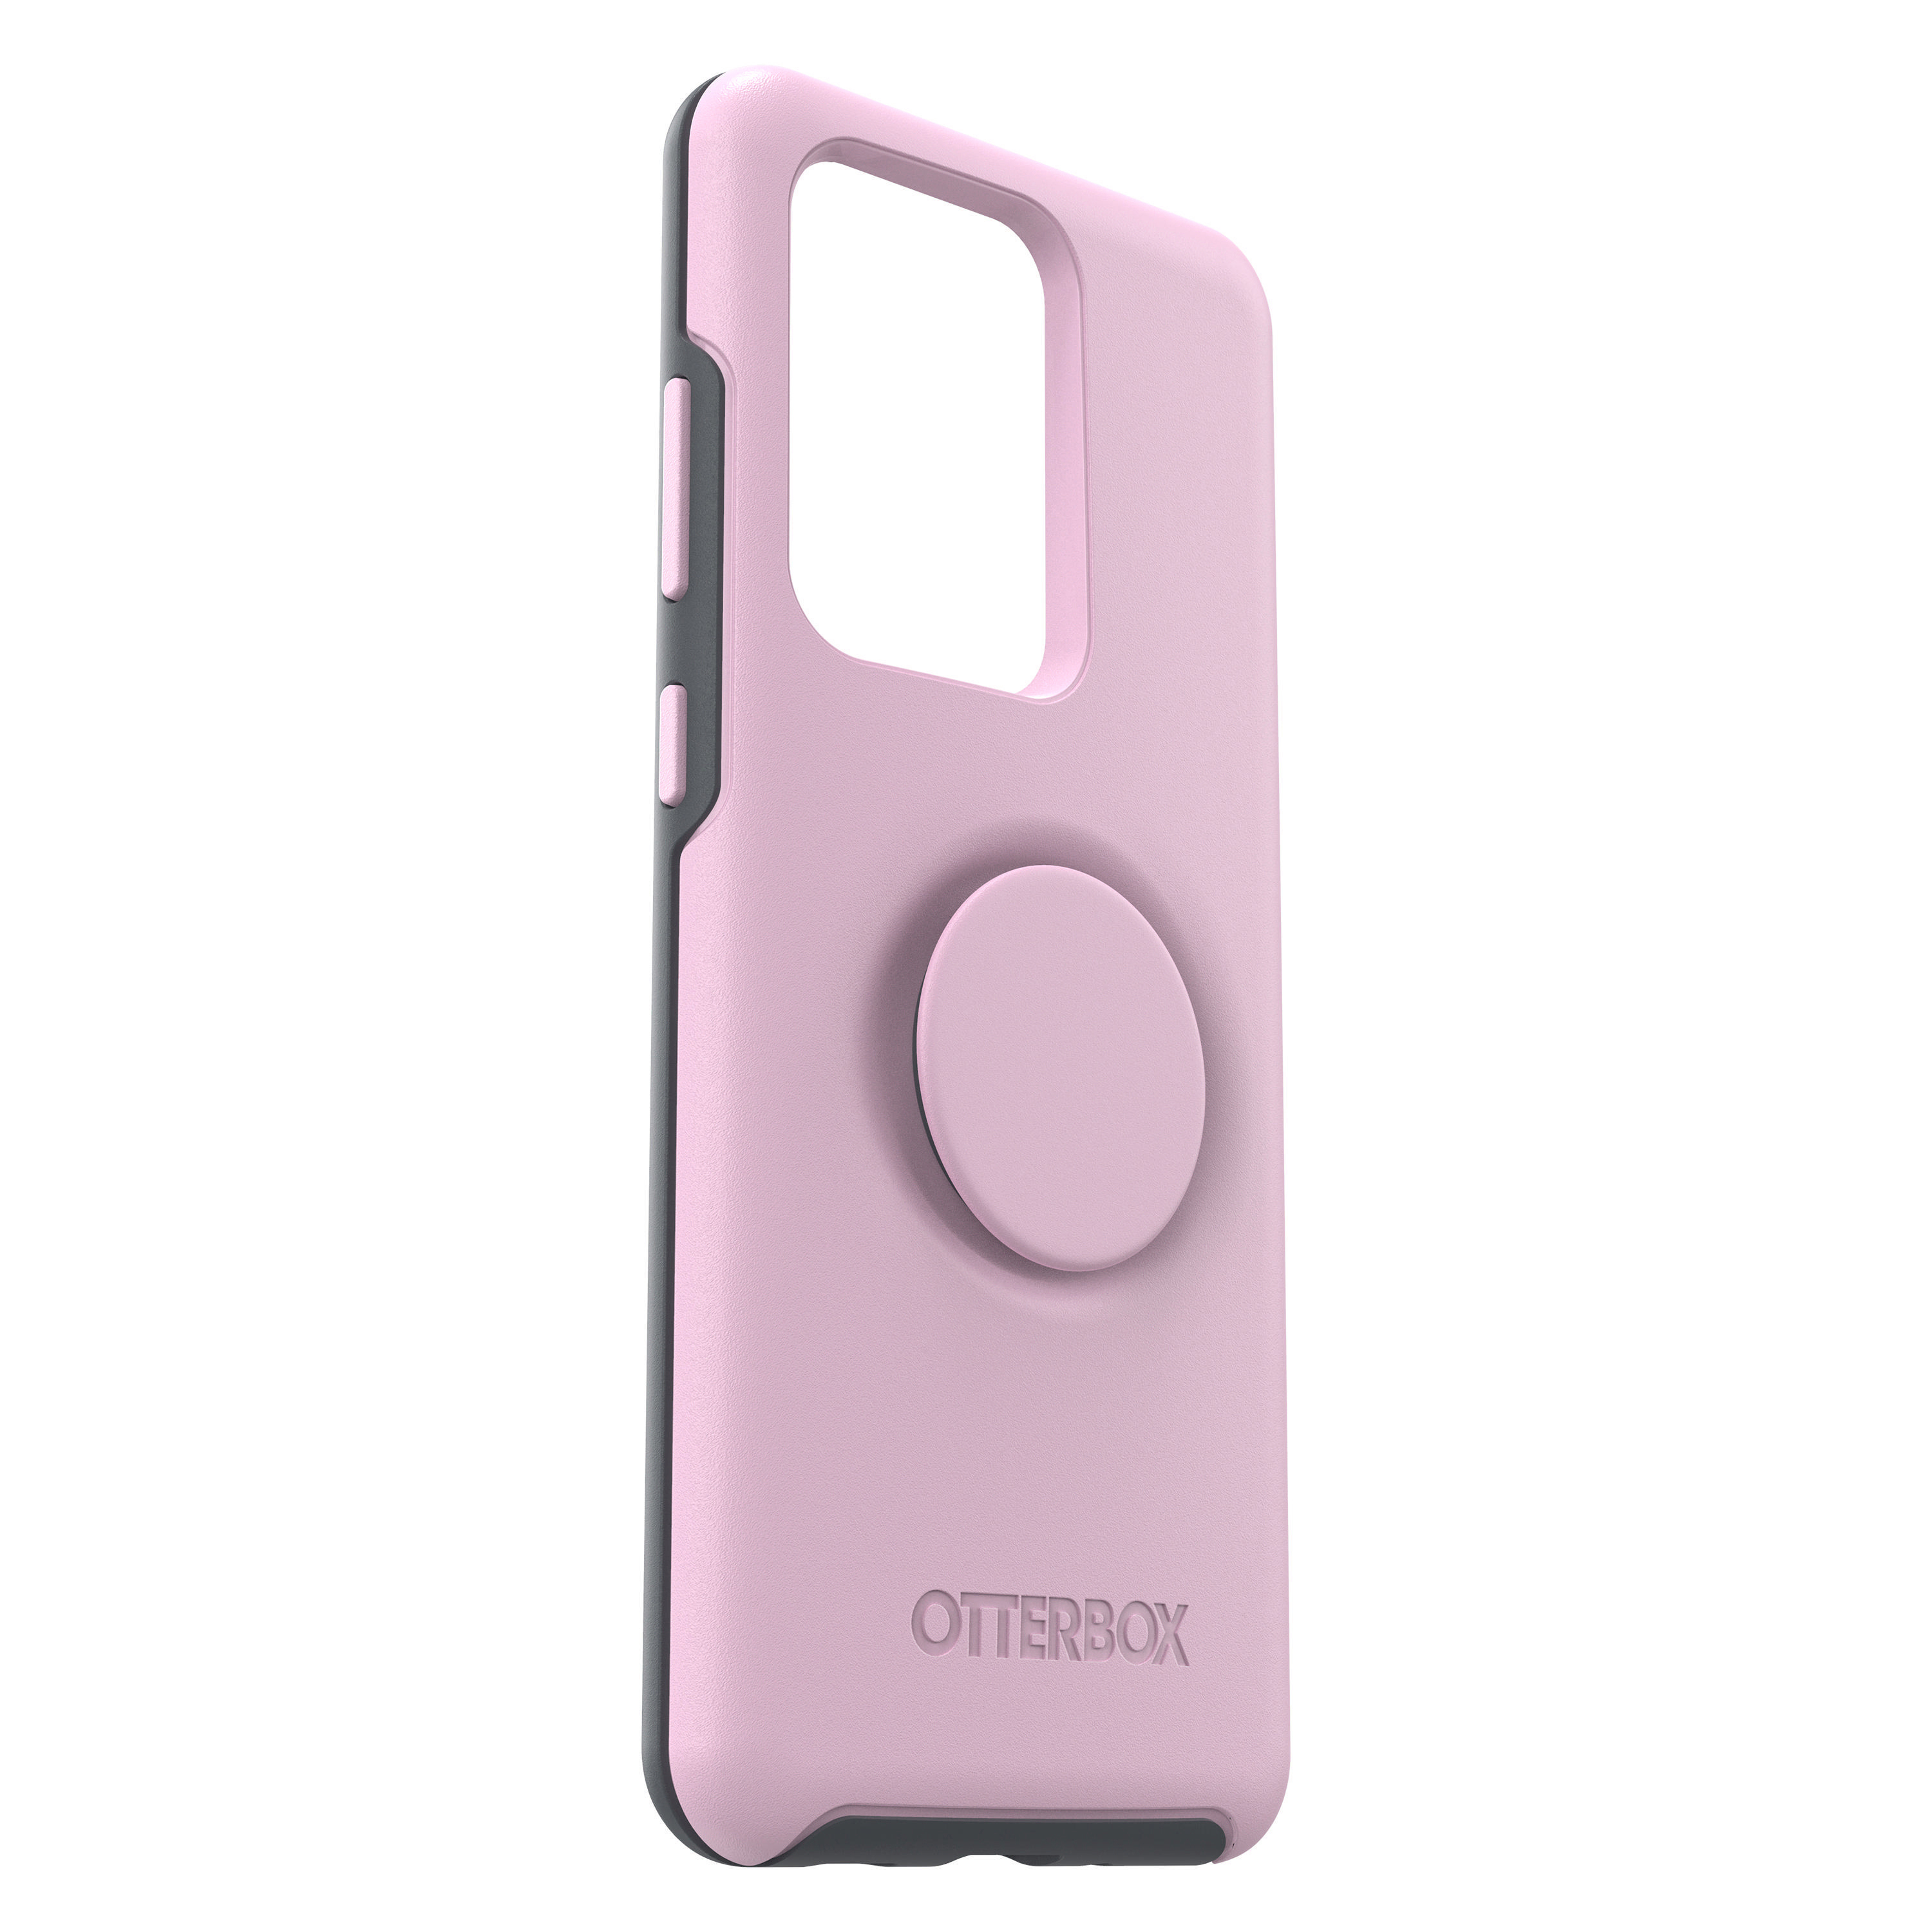 OTTERBOX 77-64239, Backcover, Ultra, Pink Samsung, Galaxy S20